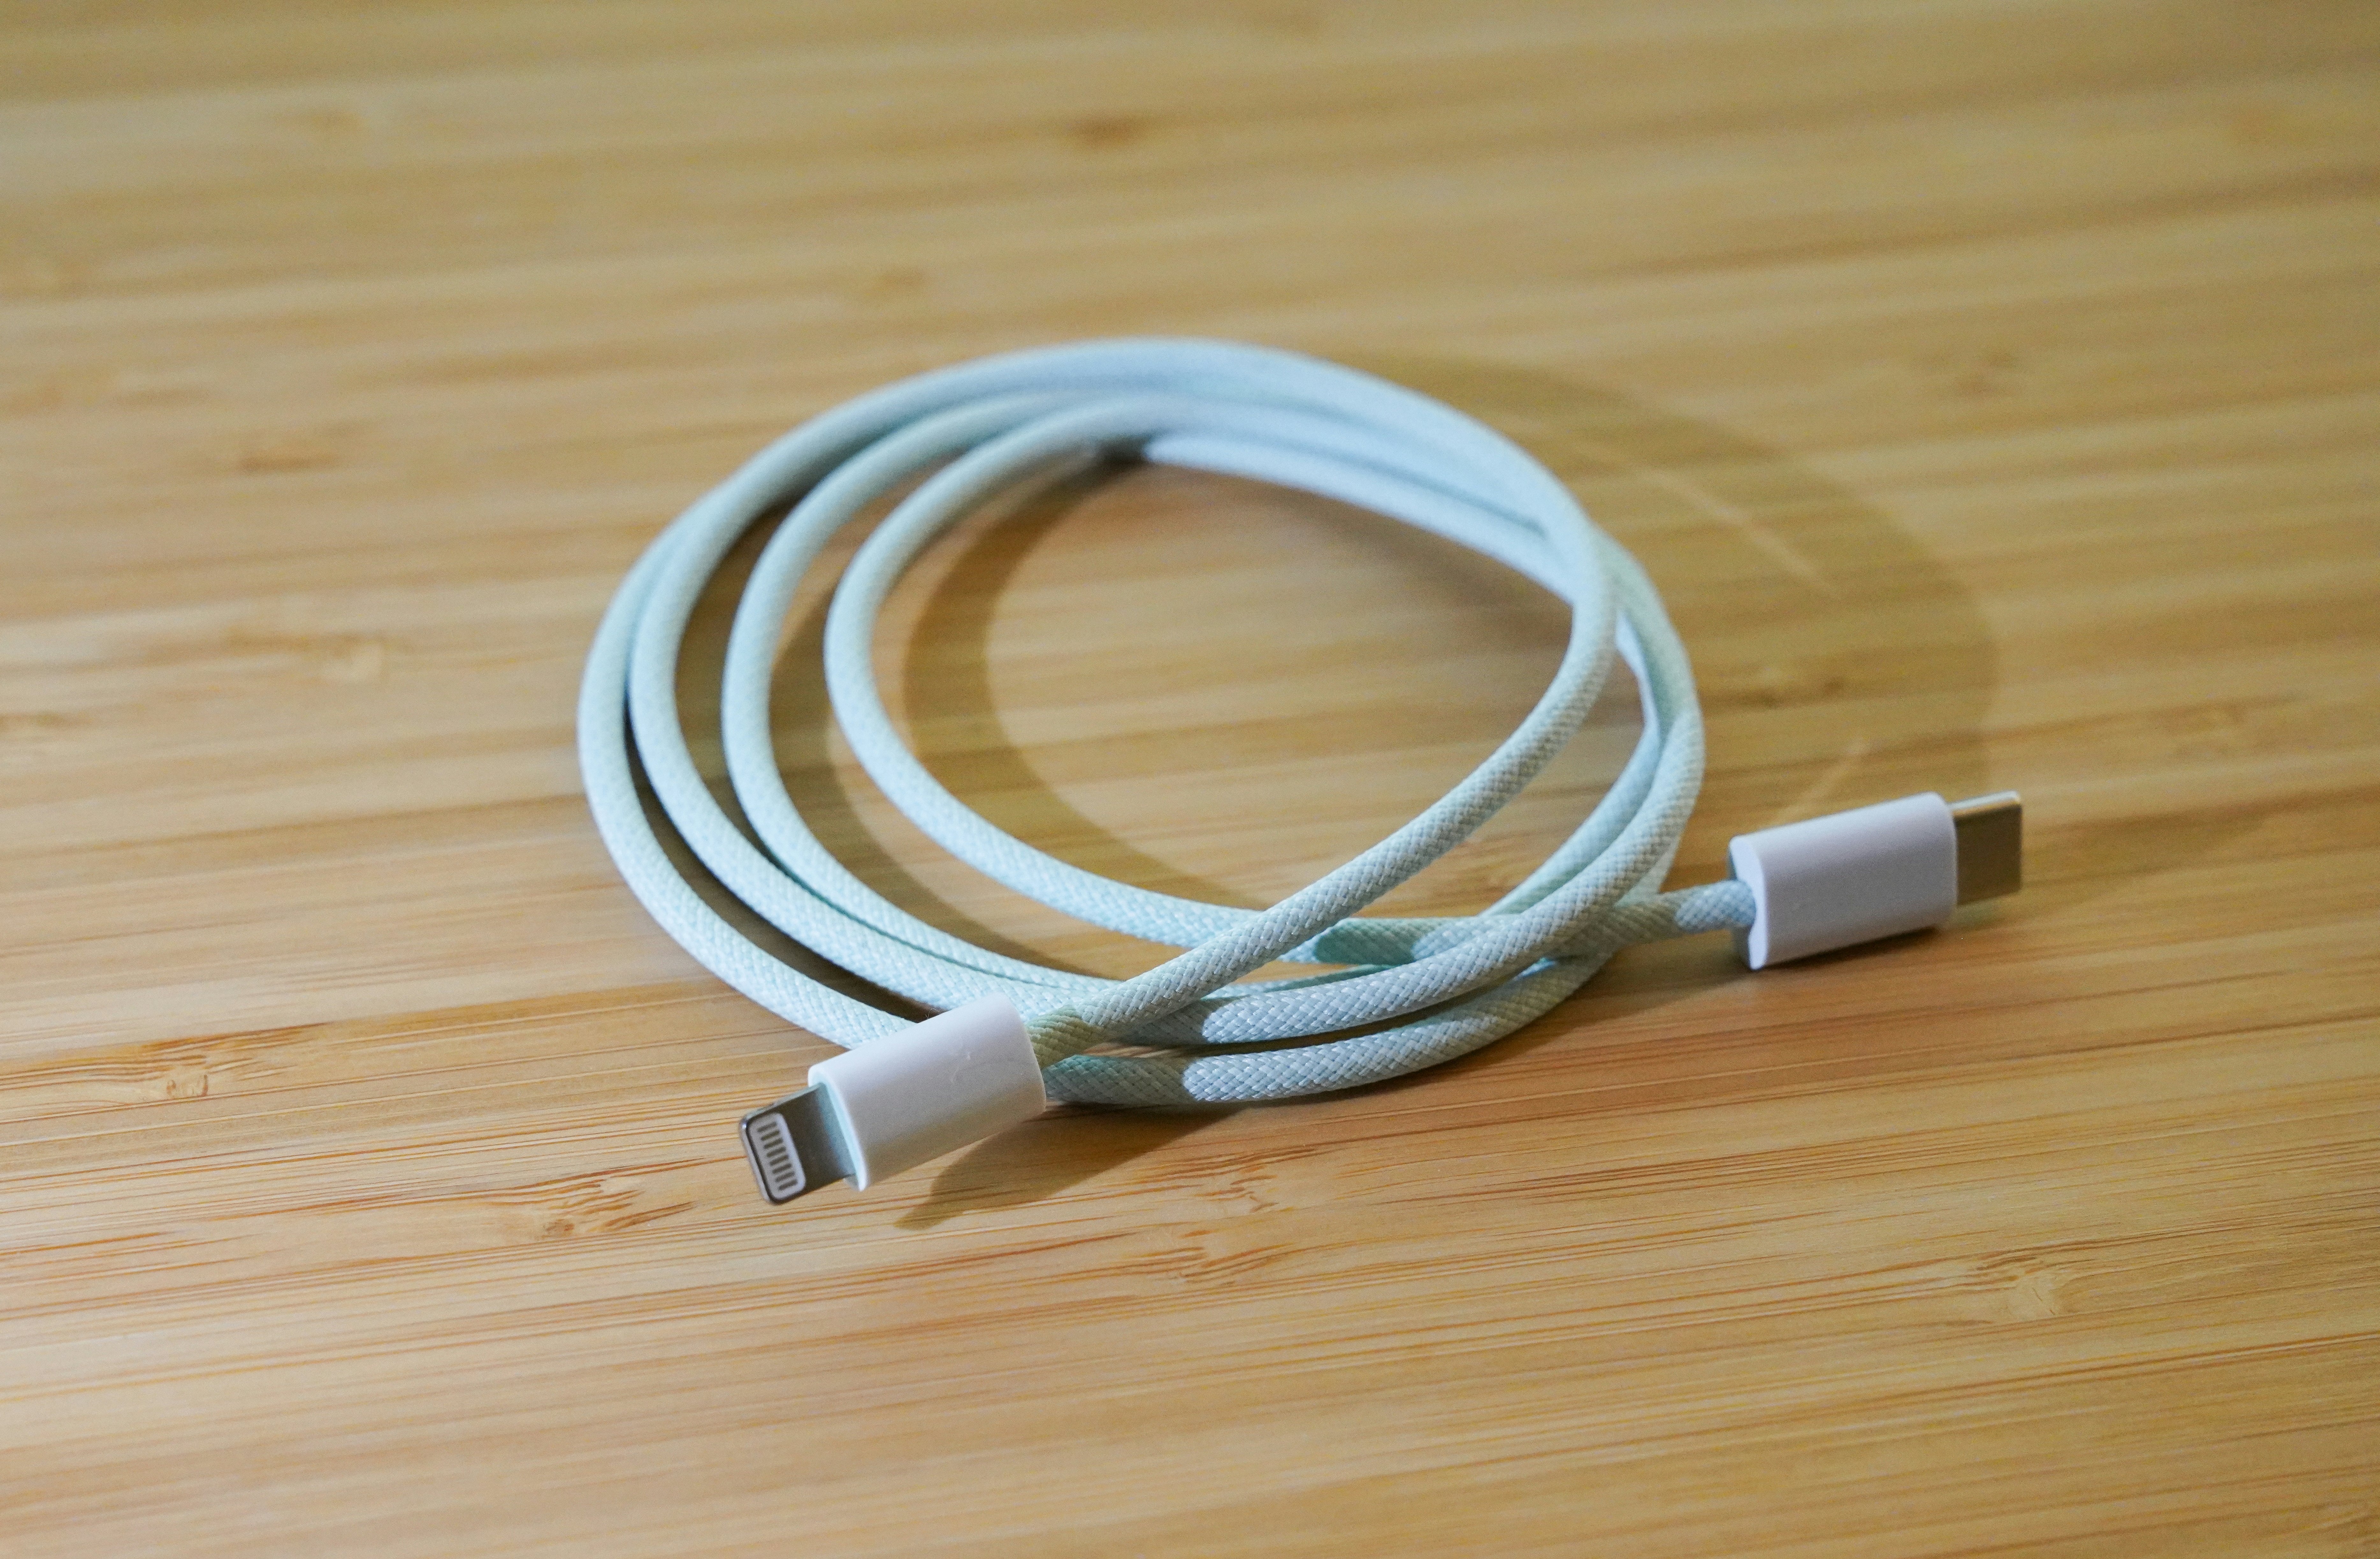 Why did Apple switch to USB-C from Lightning? The do-it-all